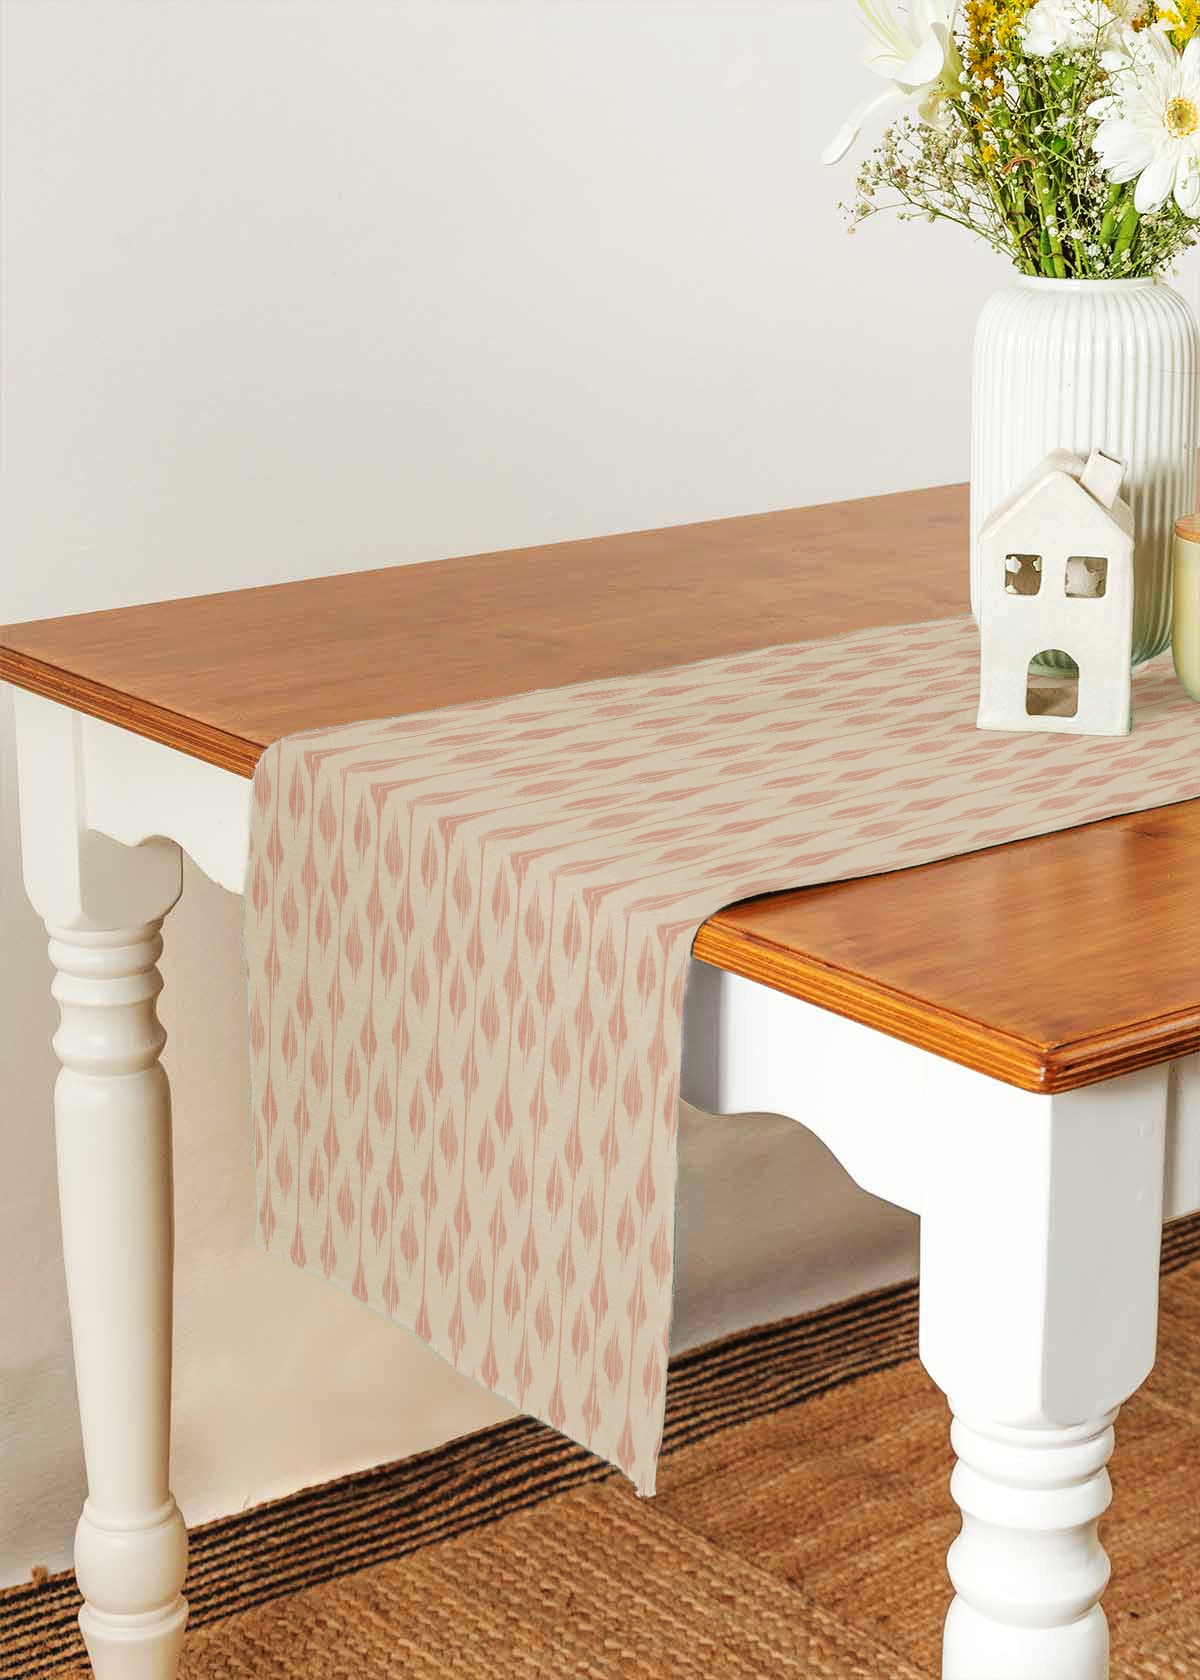 Chenab 100% cotton customisable geometric table Runner for dining - Blush